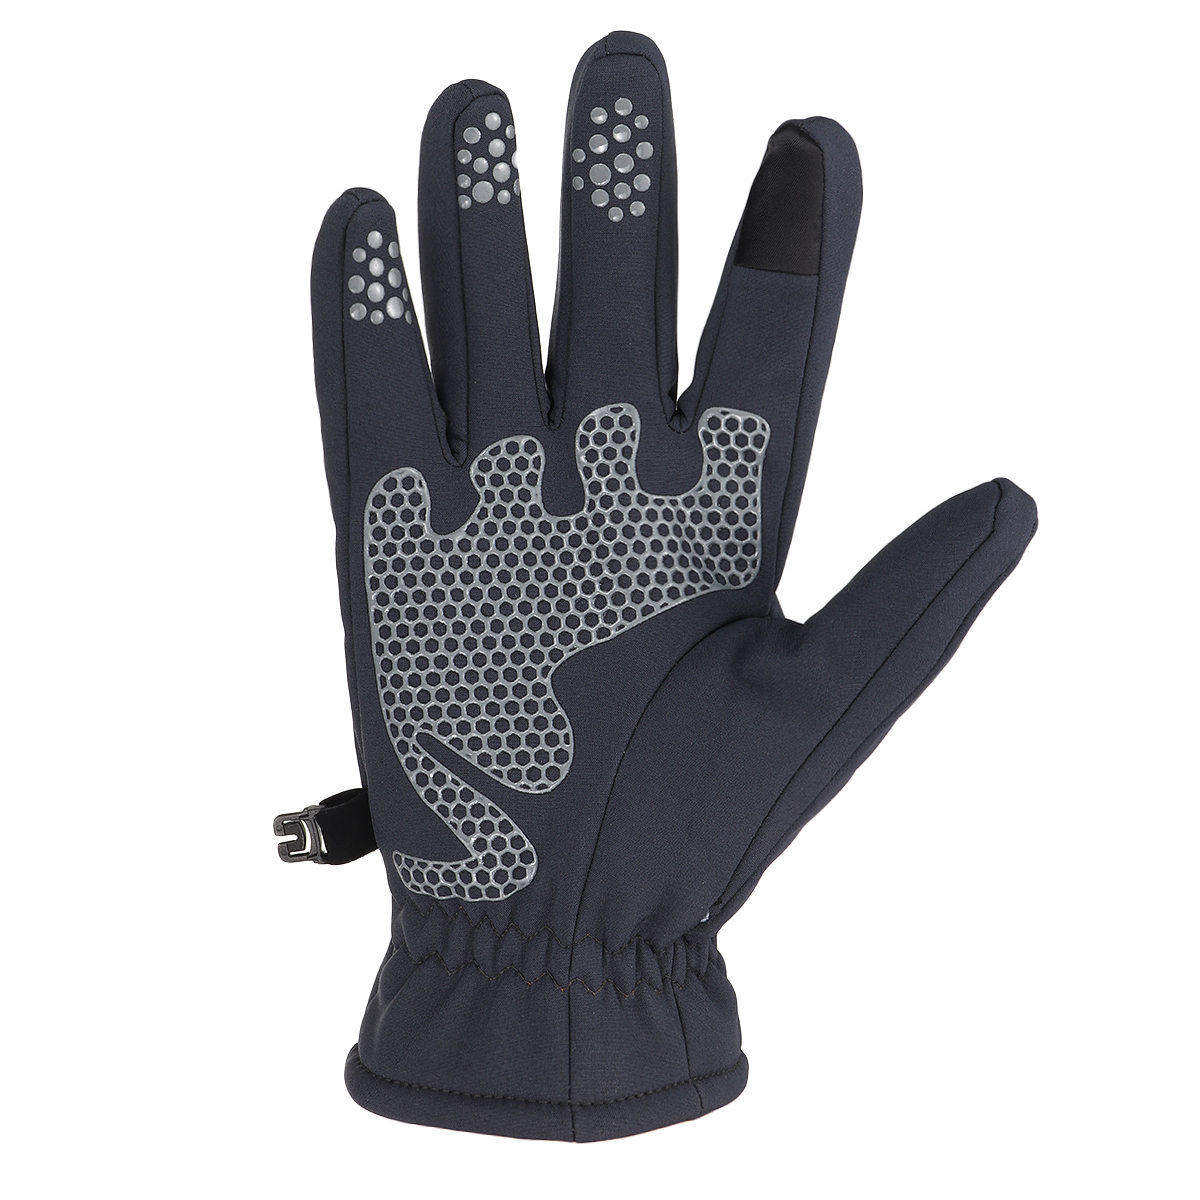 1Pair-899-Outdoor-Non-slip-Windproof-Warm-Thermal-Gloves-Ski-Snow-Cycling-Waterproof-Winter-Glove-1629275-10